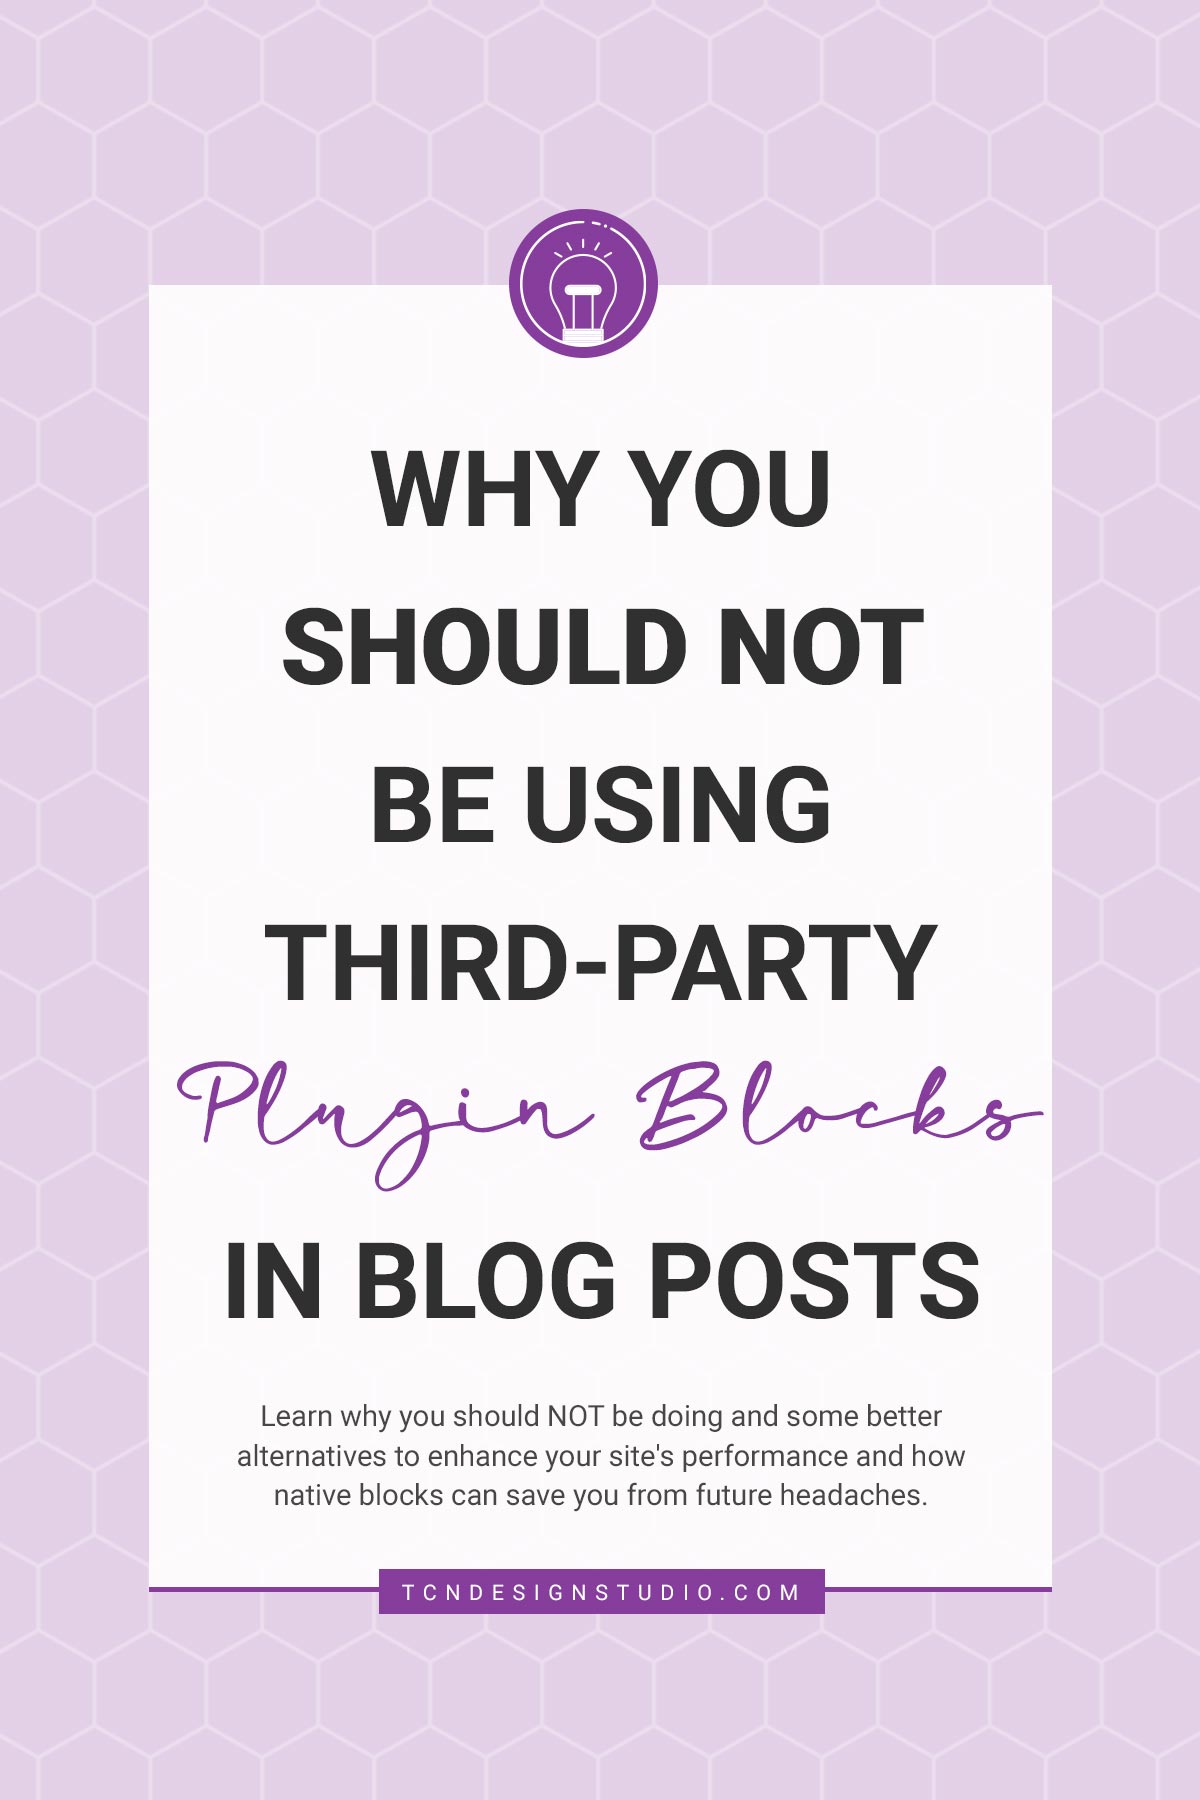 Why You Should NOT be Using Third-Party Plugin Blocks in Blog Posts